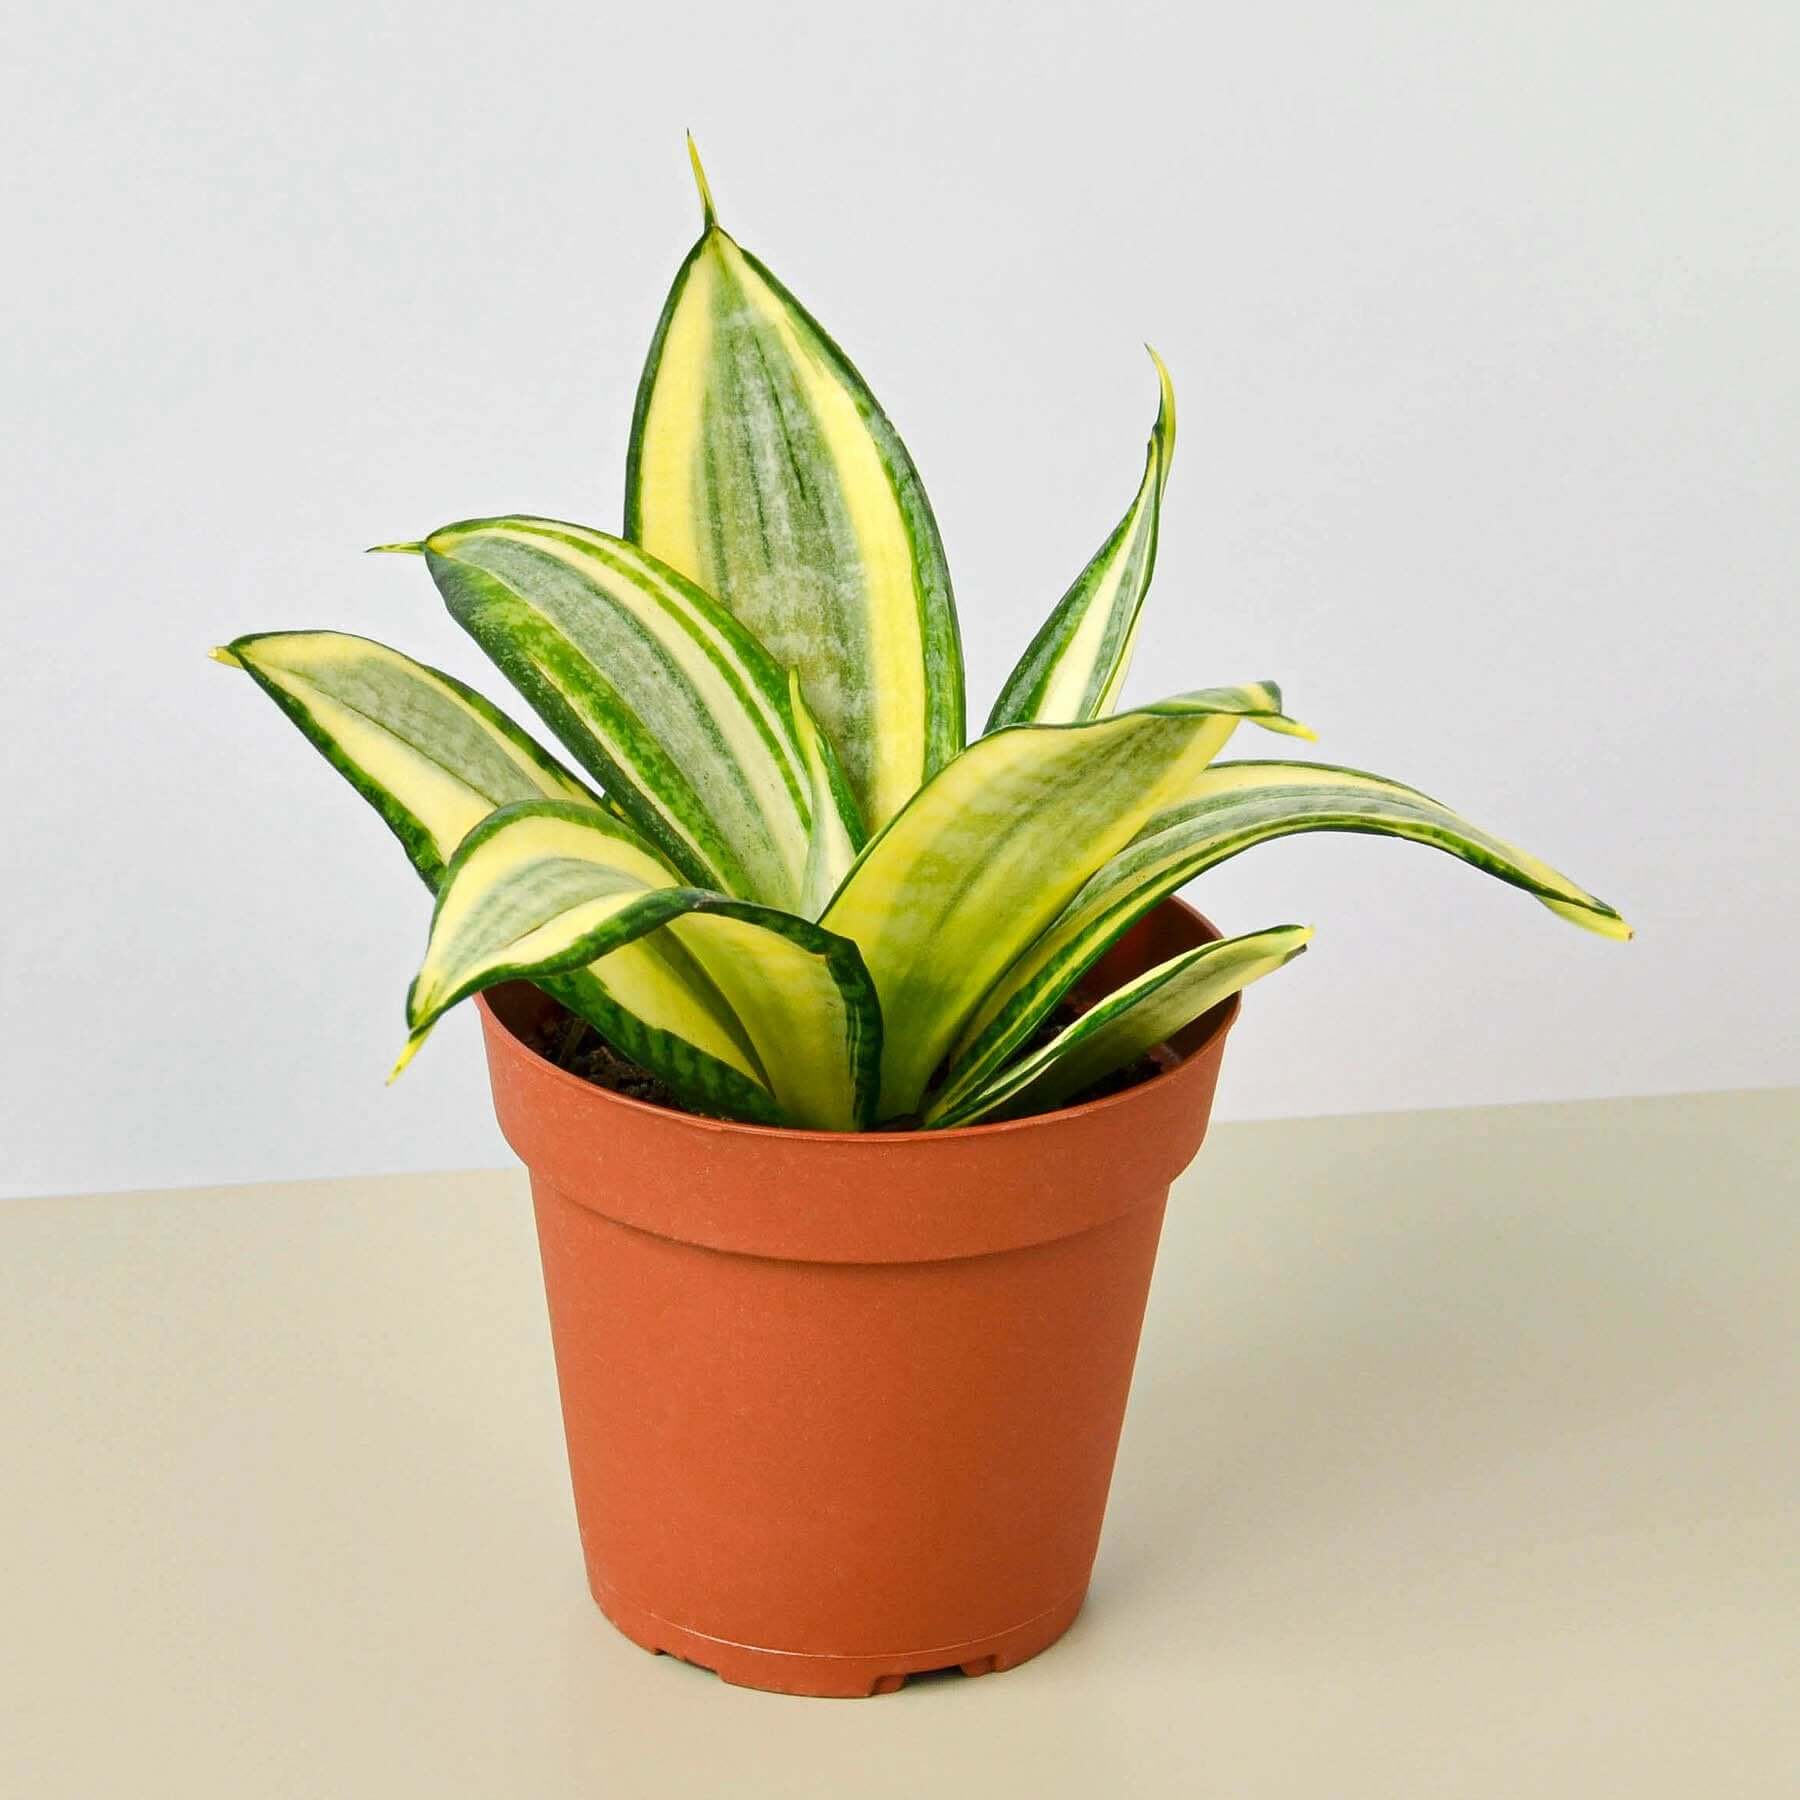 Snake Plant - Gold Hahnii | Modern house plants that clean the air